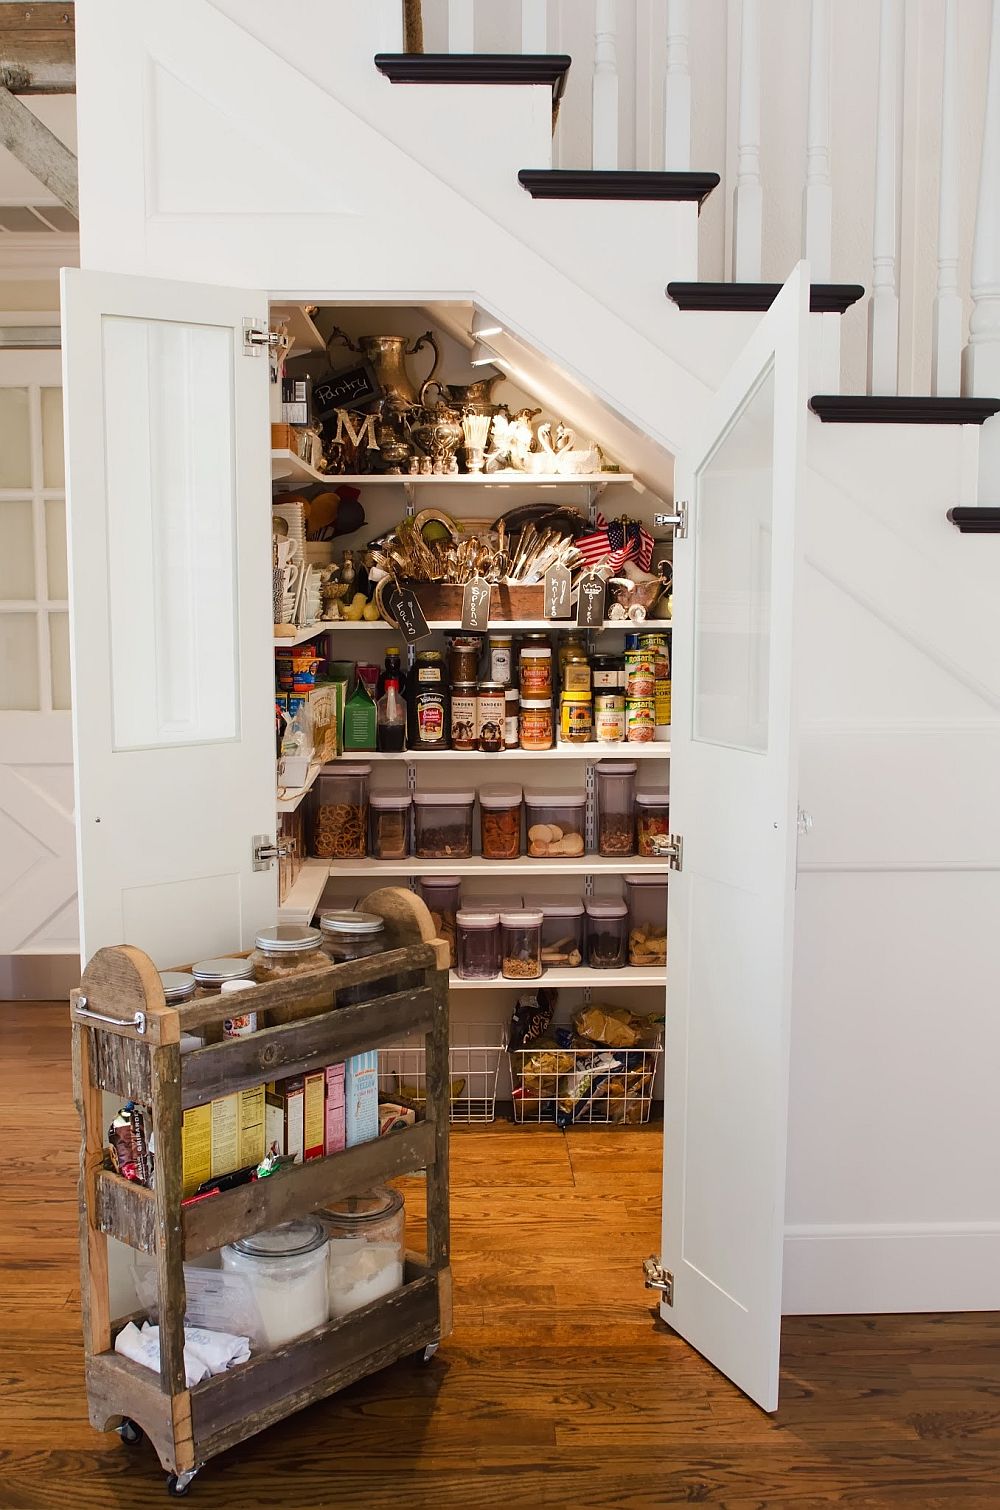 Kitchen Storage Space, Small Cabinet For Pantry